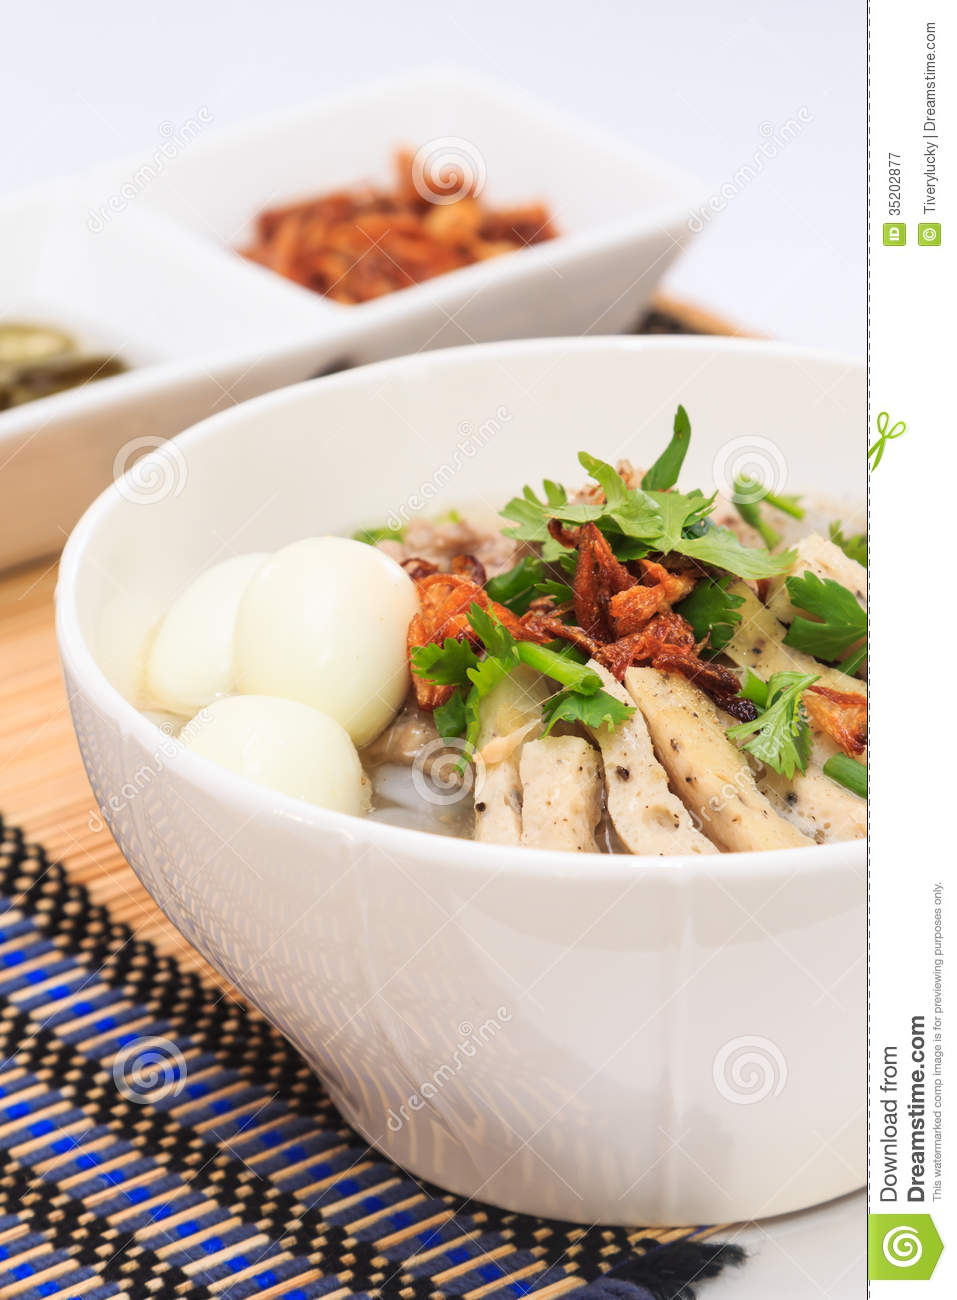 Vietnamese Food Royalty Free Stock Photography   Image  35202877